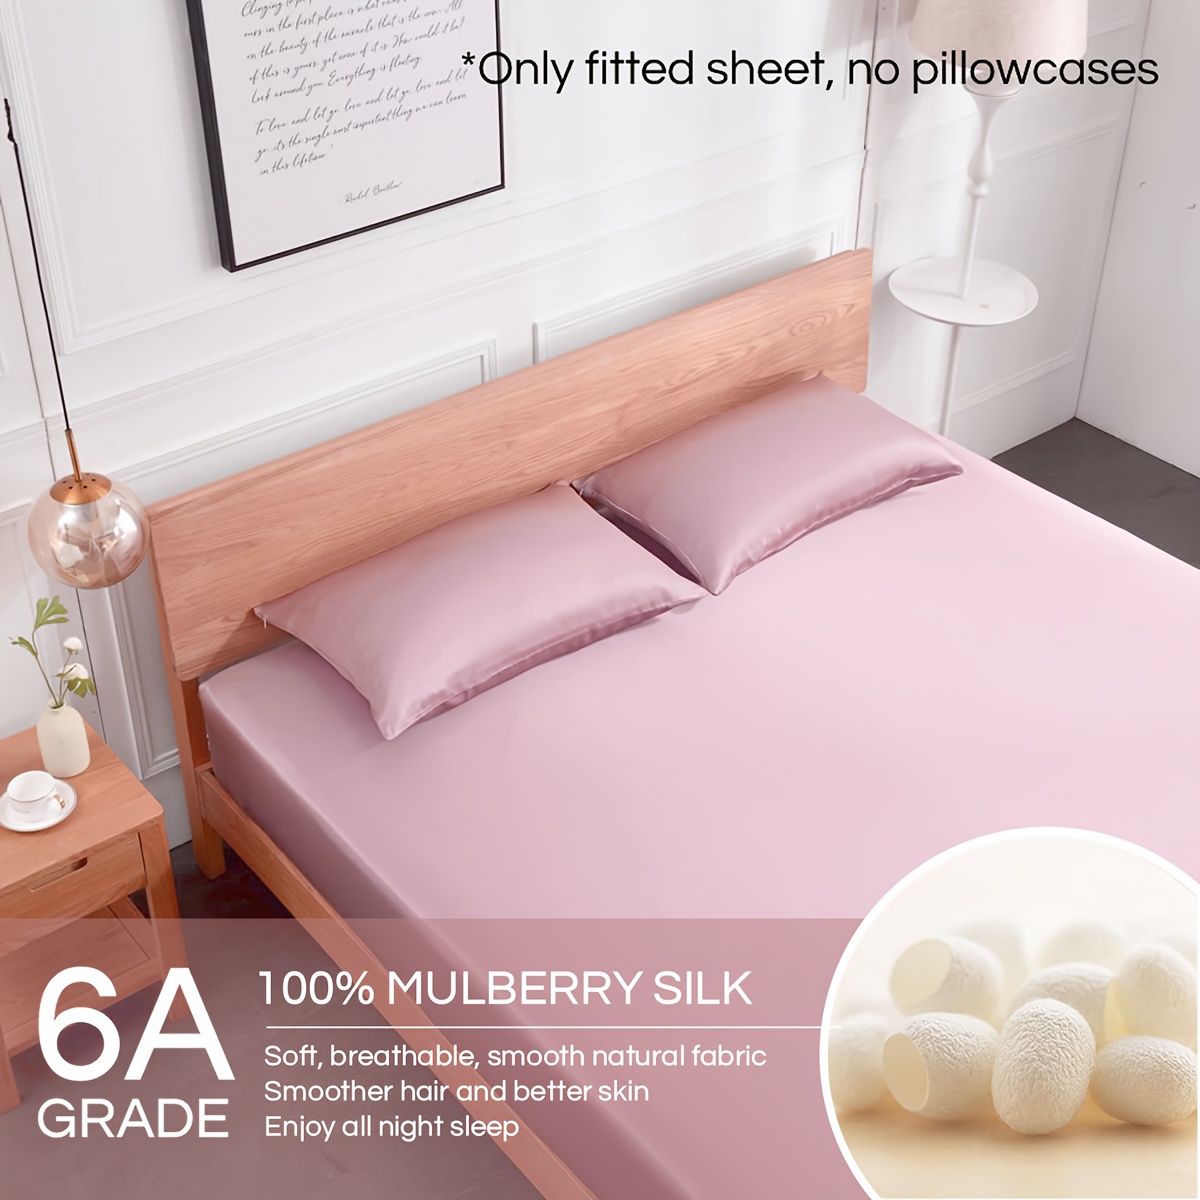 Mulberry silk fitted sheets from natural silk